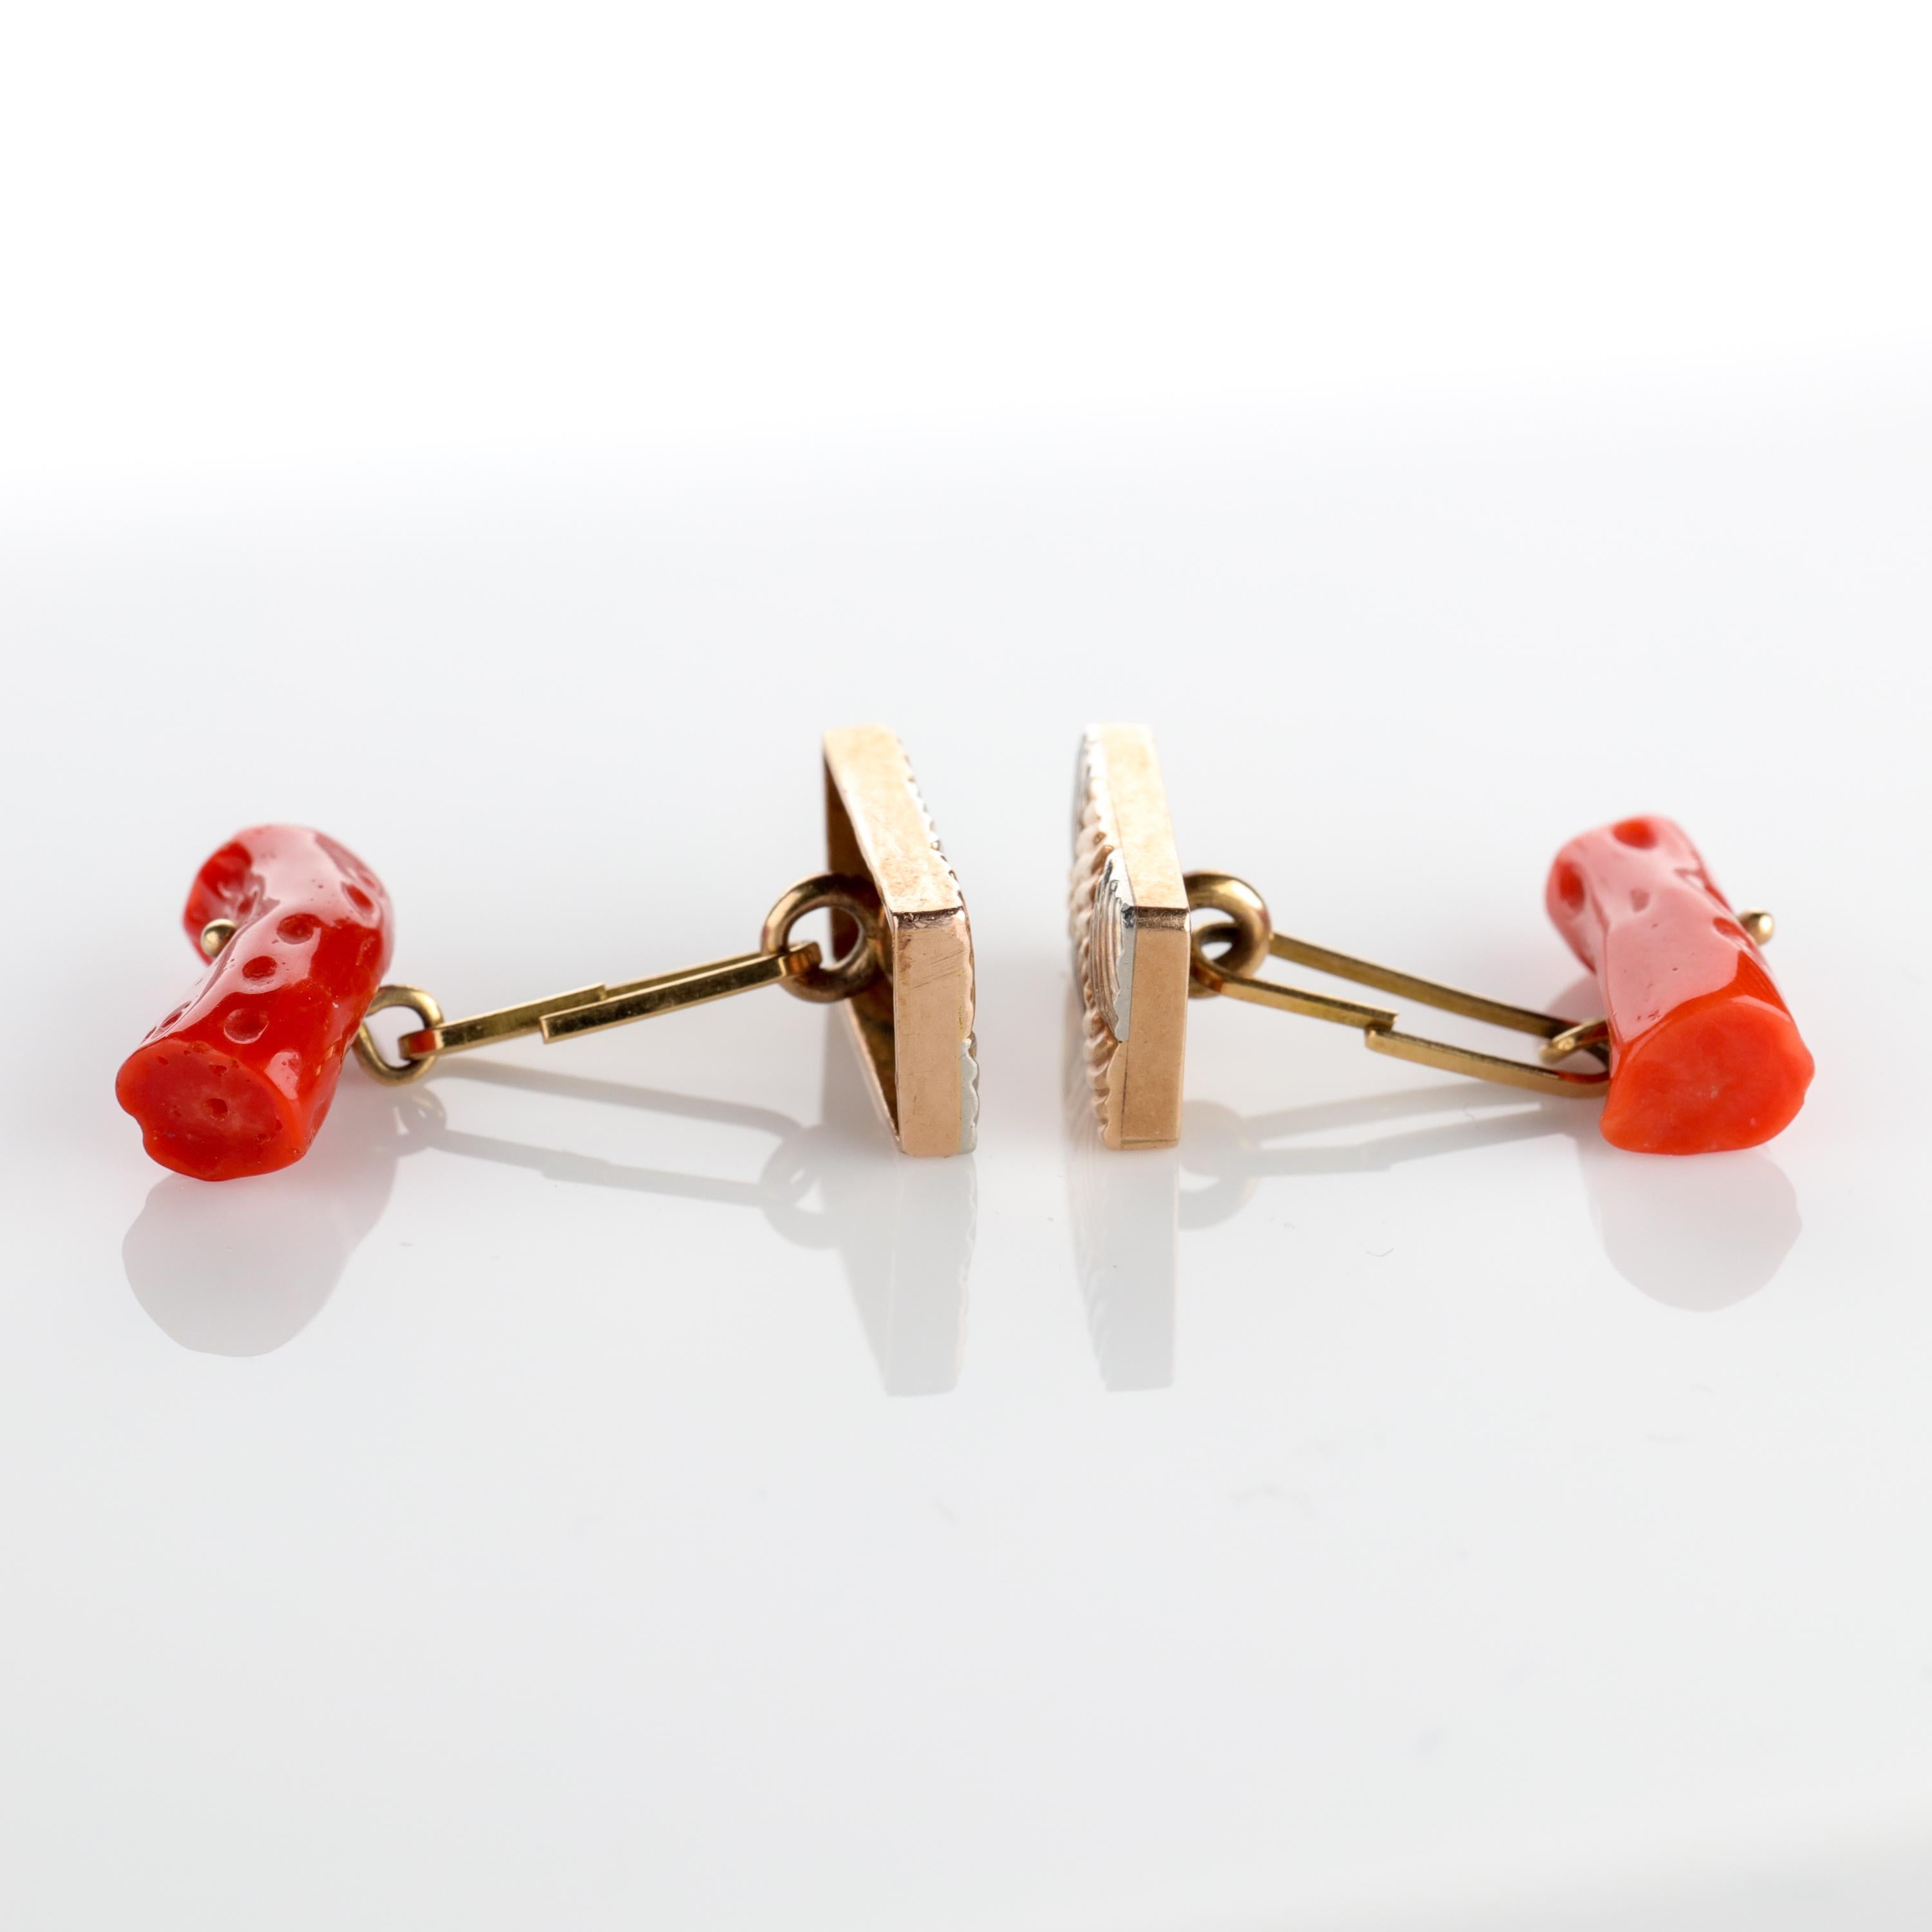 Gold & Coral Cufflinks Art Deco In Excellent Condition For Sale In Southbury, CT